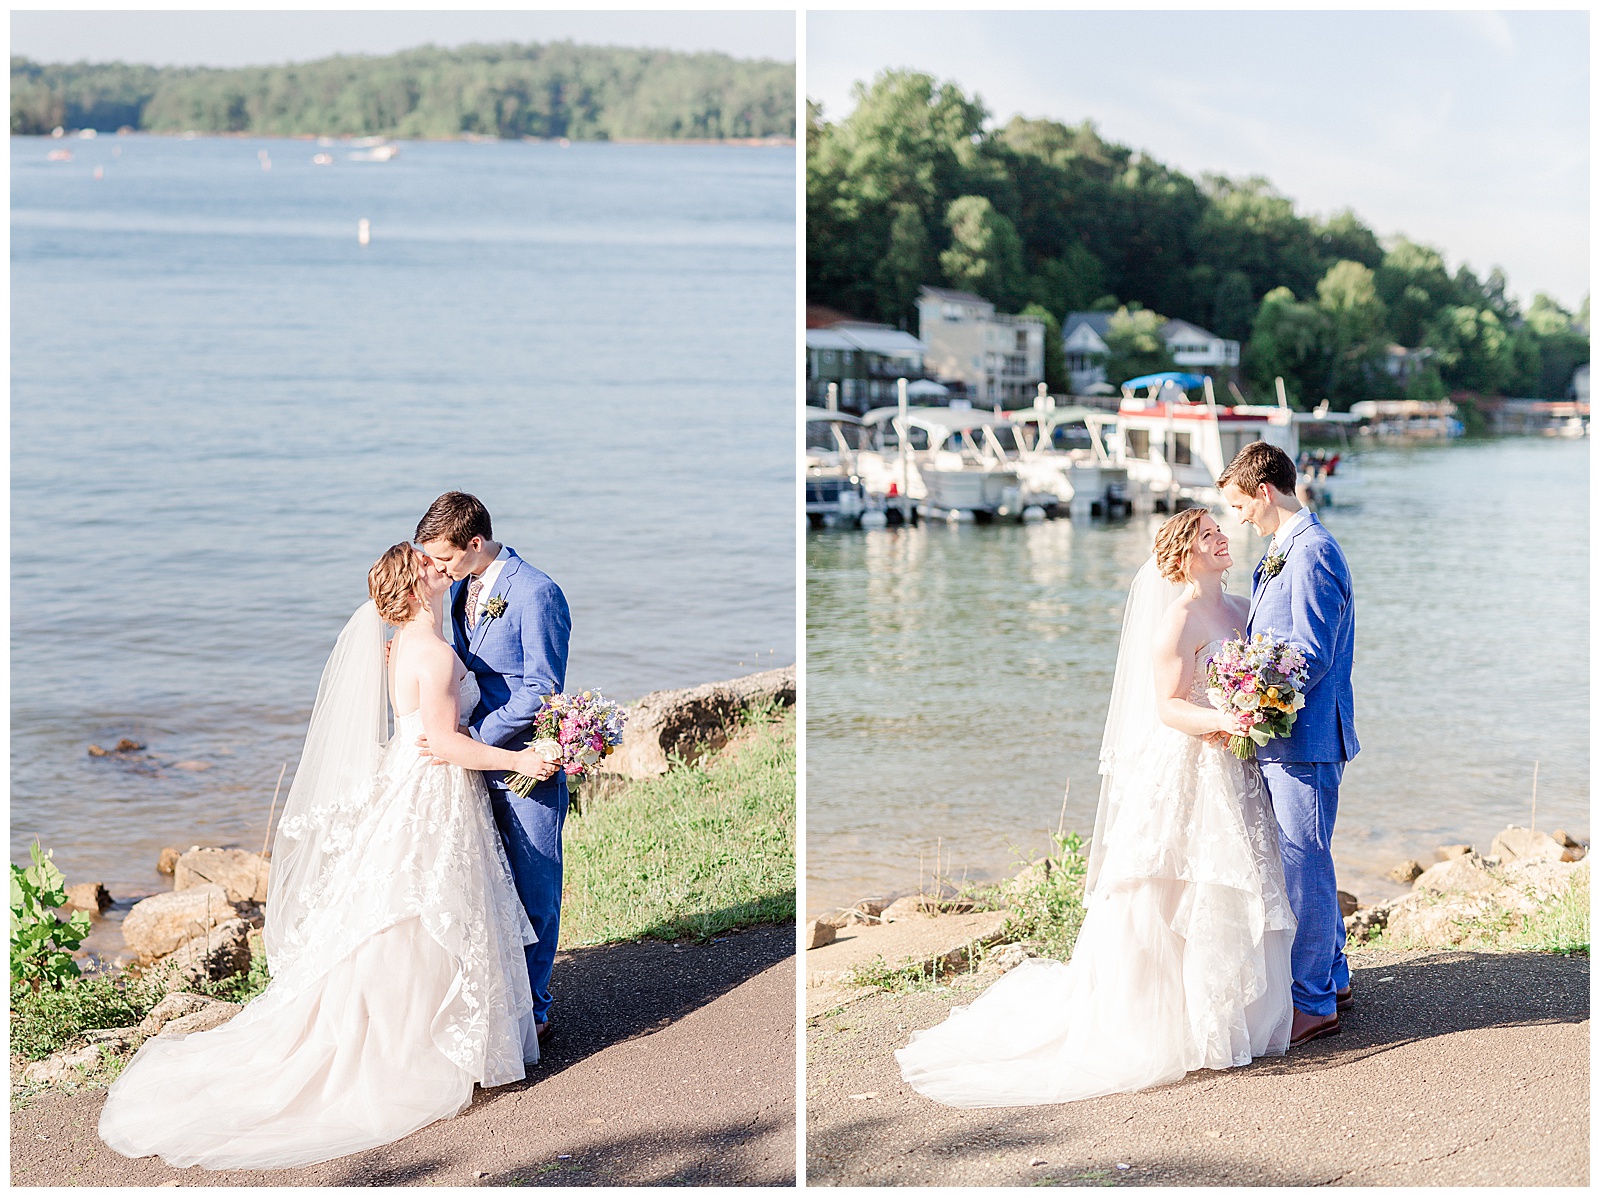 Bride and groom pause by the lake for photos from Outdoorsy Summer Wedding at North Carolina Lakehouse in the Mountains | check out the full wedding at KevynDixonPhoto.com